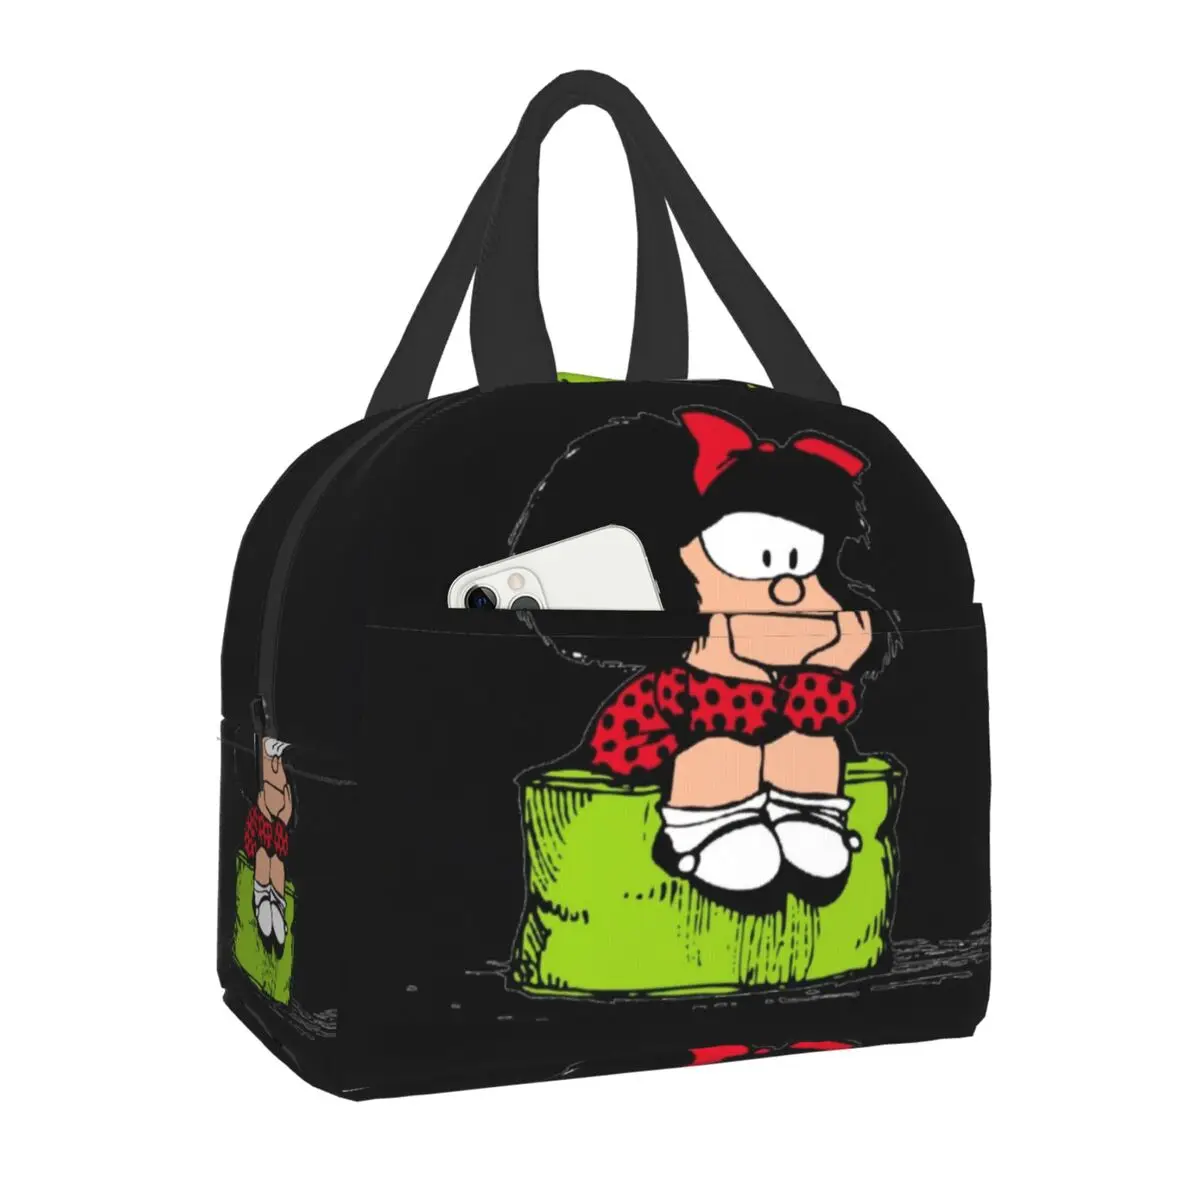 Mafalda Portable Lunch Box Quino Comic Cooler Thermal Food Insulated Lunch Bag For Women Kids School Children Multifunction Bags